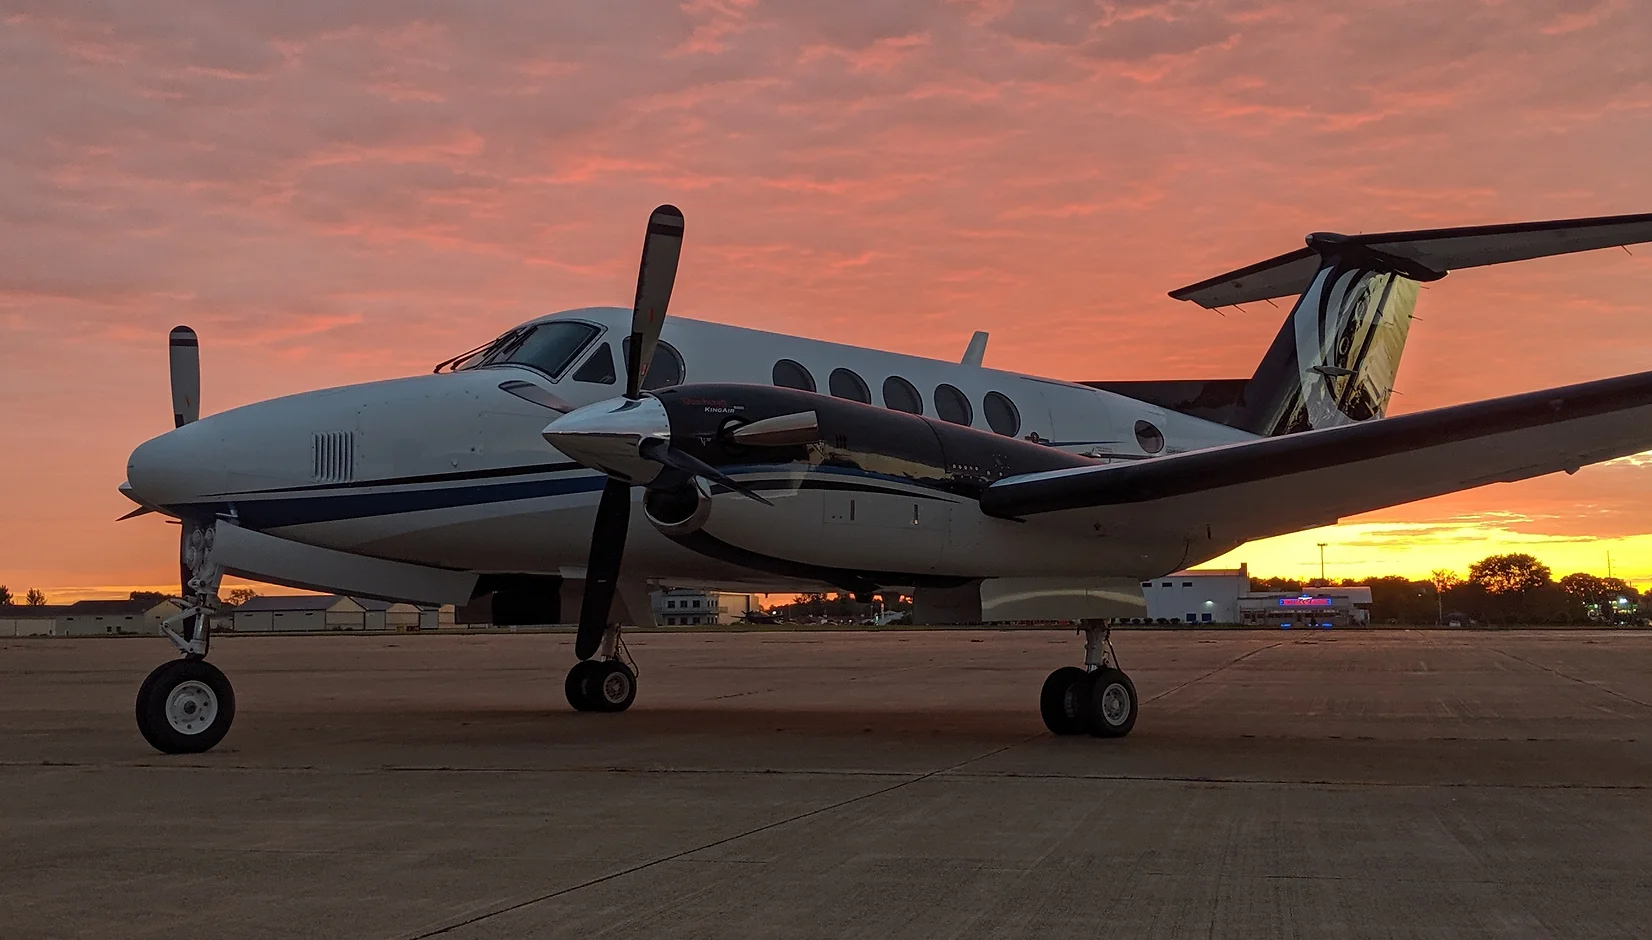 King Air b200 - N450S | Cruise Speed - 315 MPH | Range - 1,200 miles | Seating Capacity - 2 pilots / 7 passengers | Equipped with radar and de-ice boots for flight in all weather conditions, a capable platform for quick and easy travel.